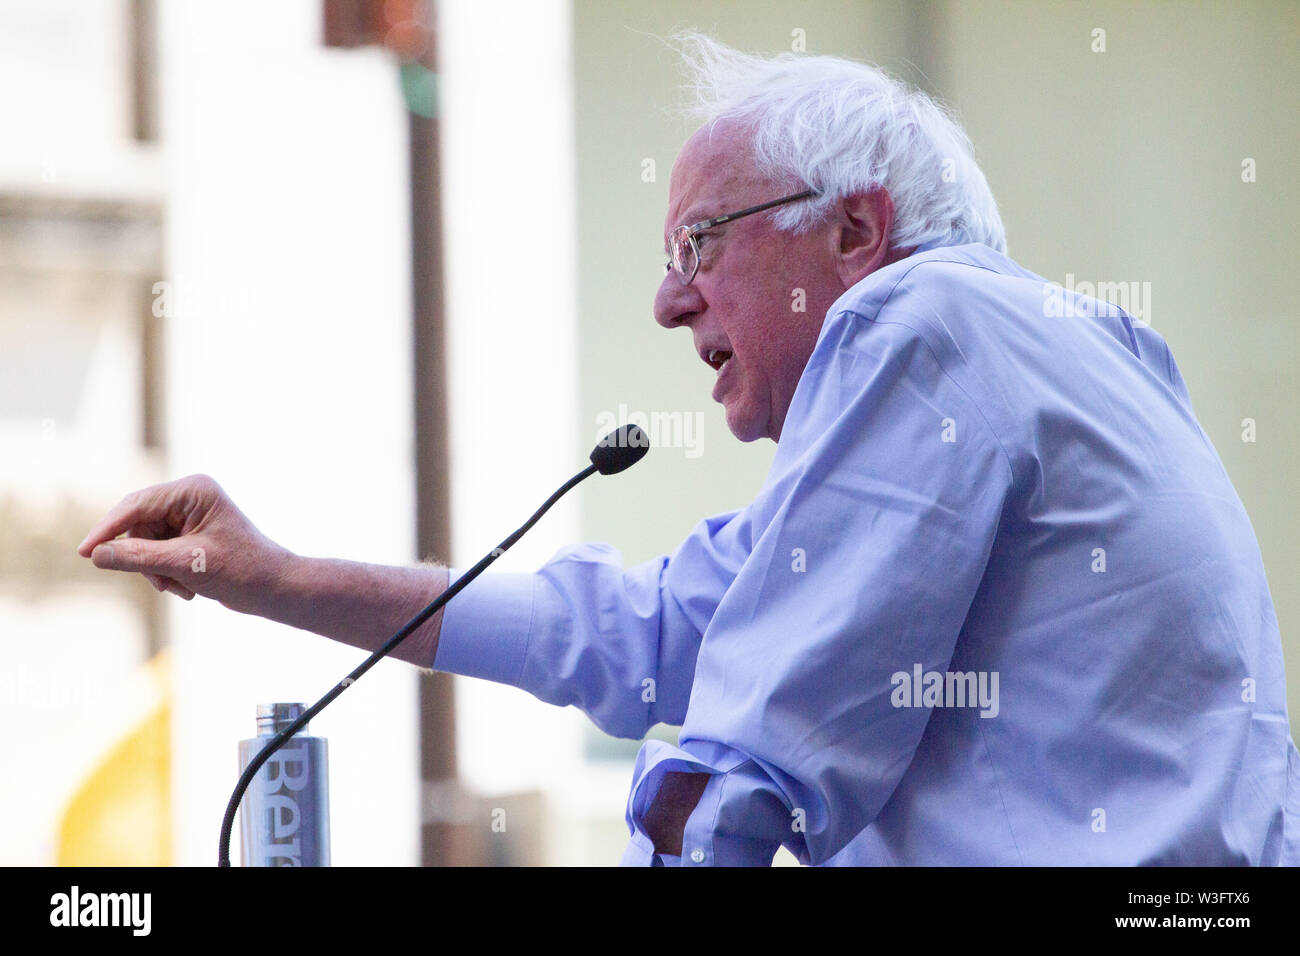 Philadelphia, Pennsylvania, USA. 15th July, 2019. July 15, 2019 - Senator Bernie Sanders addresses the crowd at a rally gathered to protest the closure of Hahnemann University Hospital in Philadelphia, PA, July 15, 2019. Hahnemann, a busy urban healthcare center, is facing imminent closure after being acquired by a hedge fund that is looking to raze the building and turn the land into rental or retail properties. (Credit Image: © Michael CandeloriZUMA Wire) Credit: ZUMA Press, Inc./Alamy Live News Stock Photo